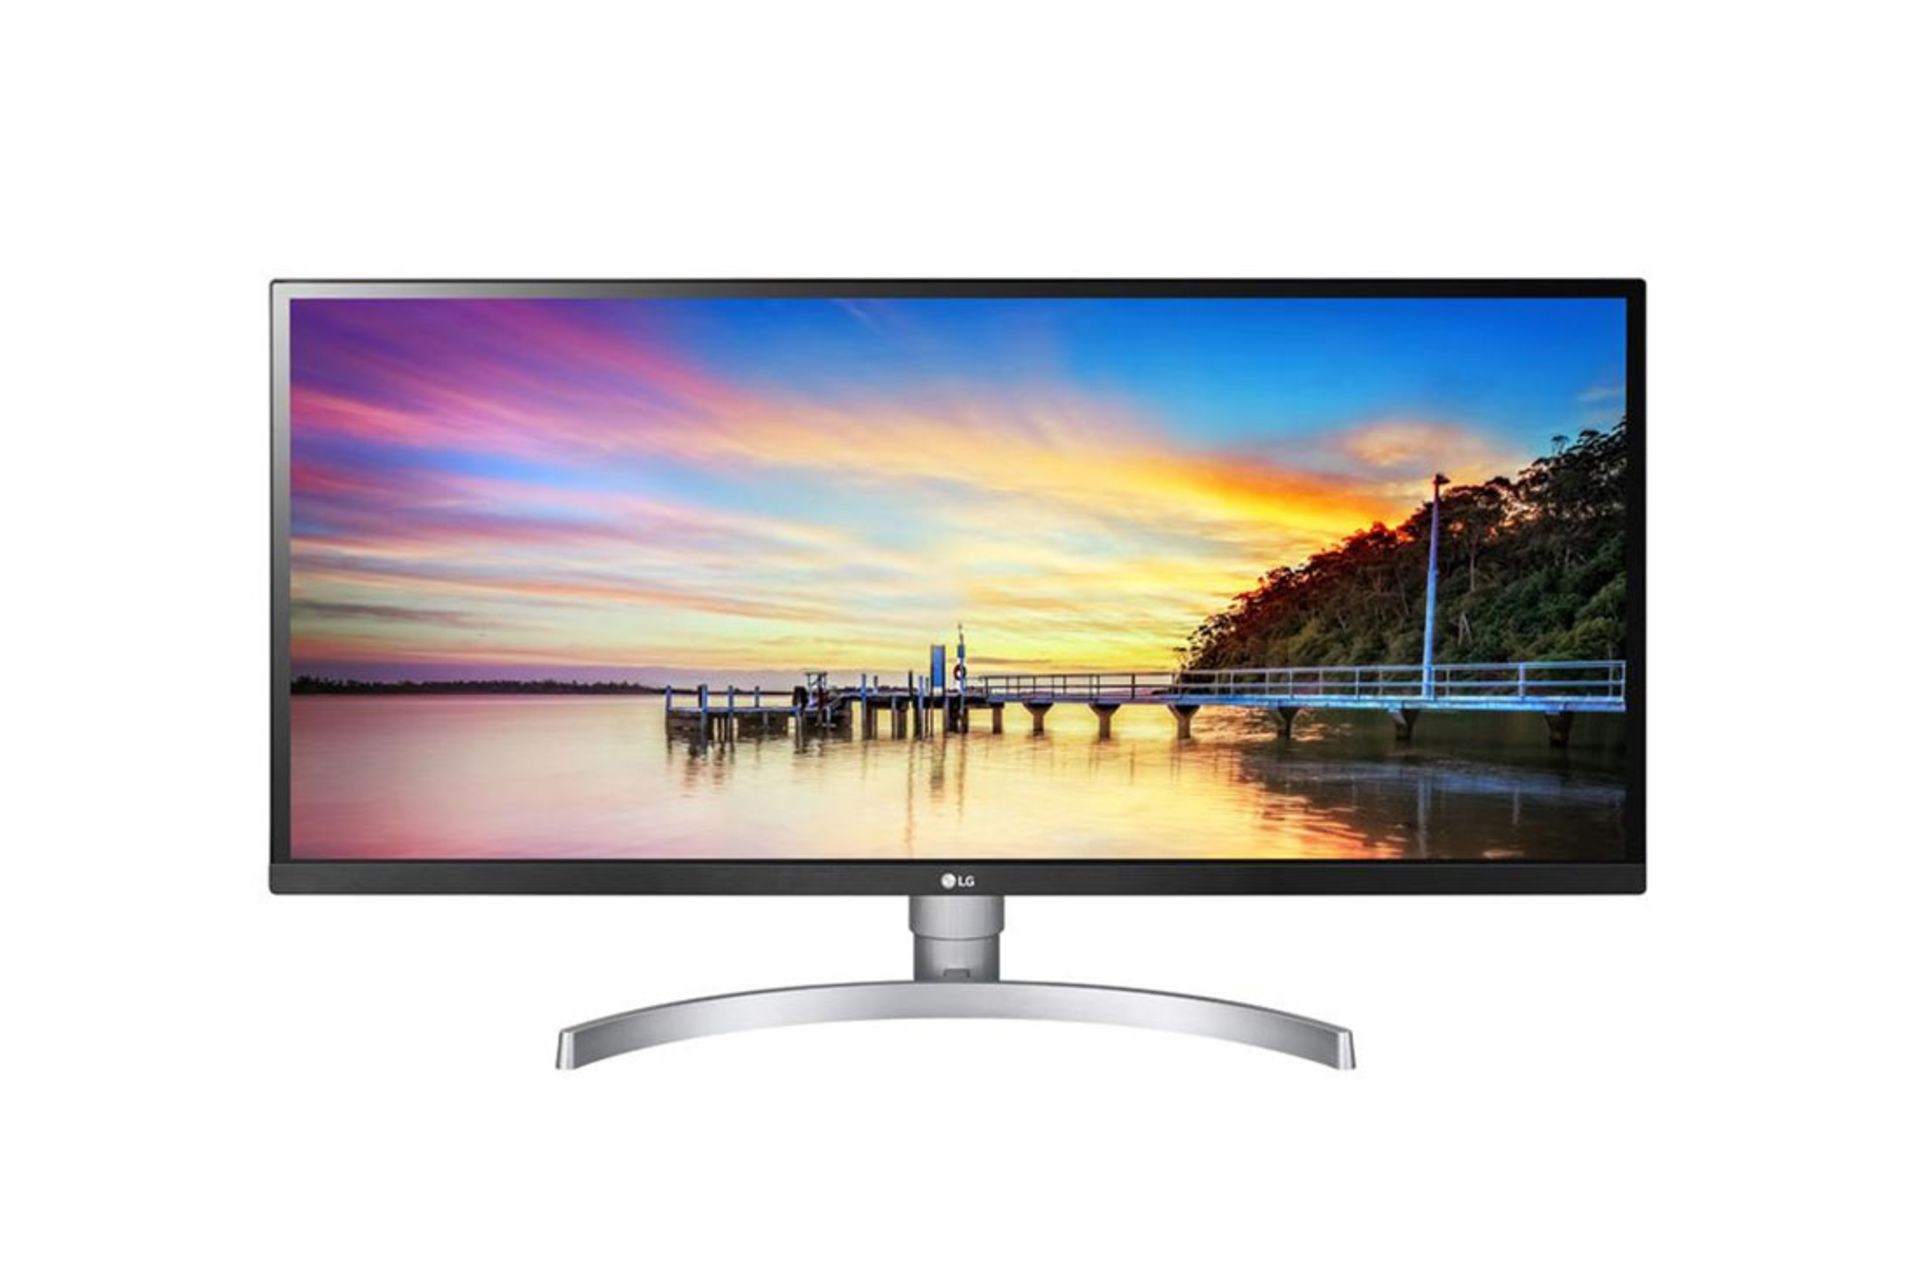 V Grade A LG 34 Inch ULTRA WIDE FULL HD IPS LED MONITOR WITH HDR 10 - HDMI, DISPLAY PORT 34WK650-W